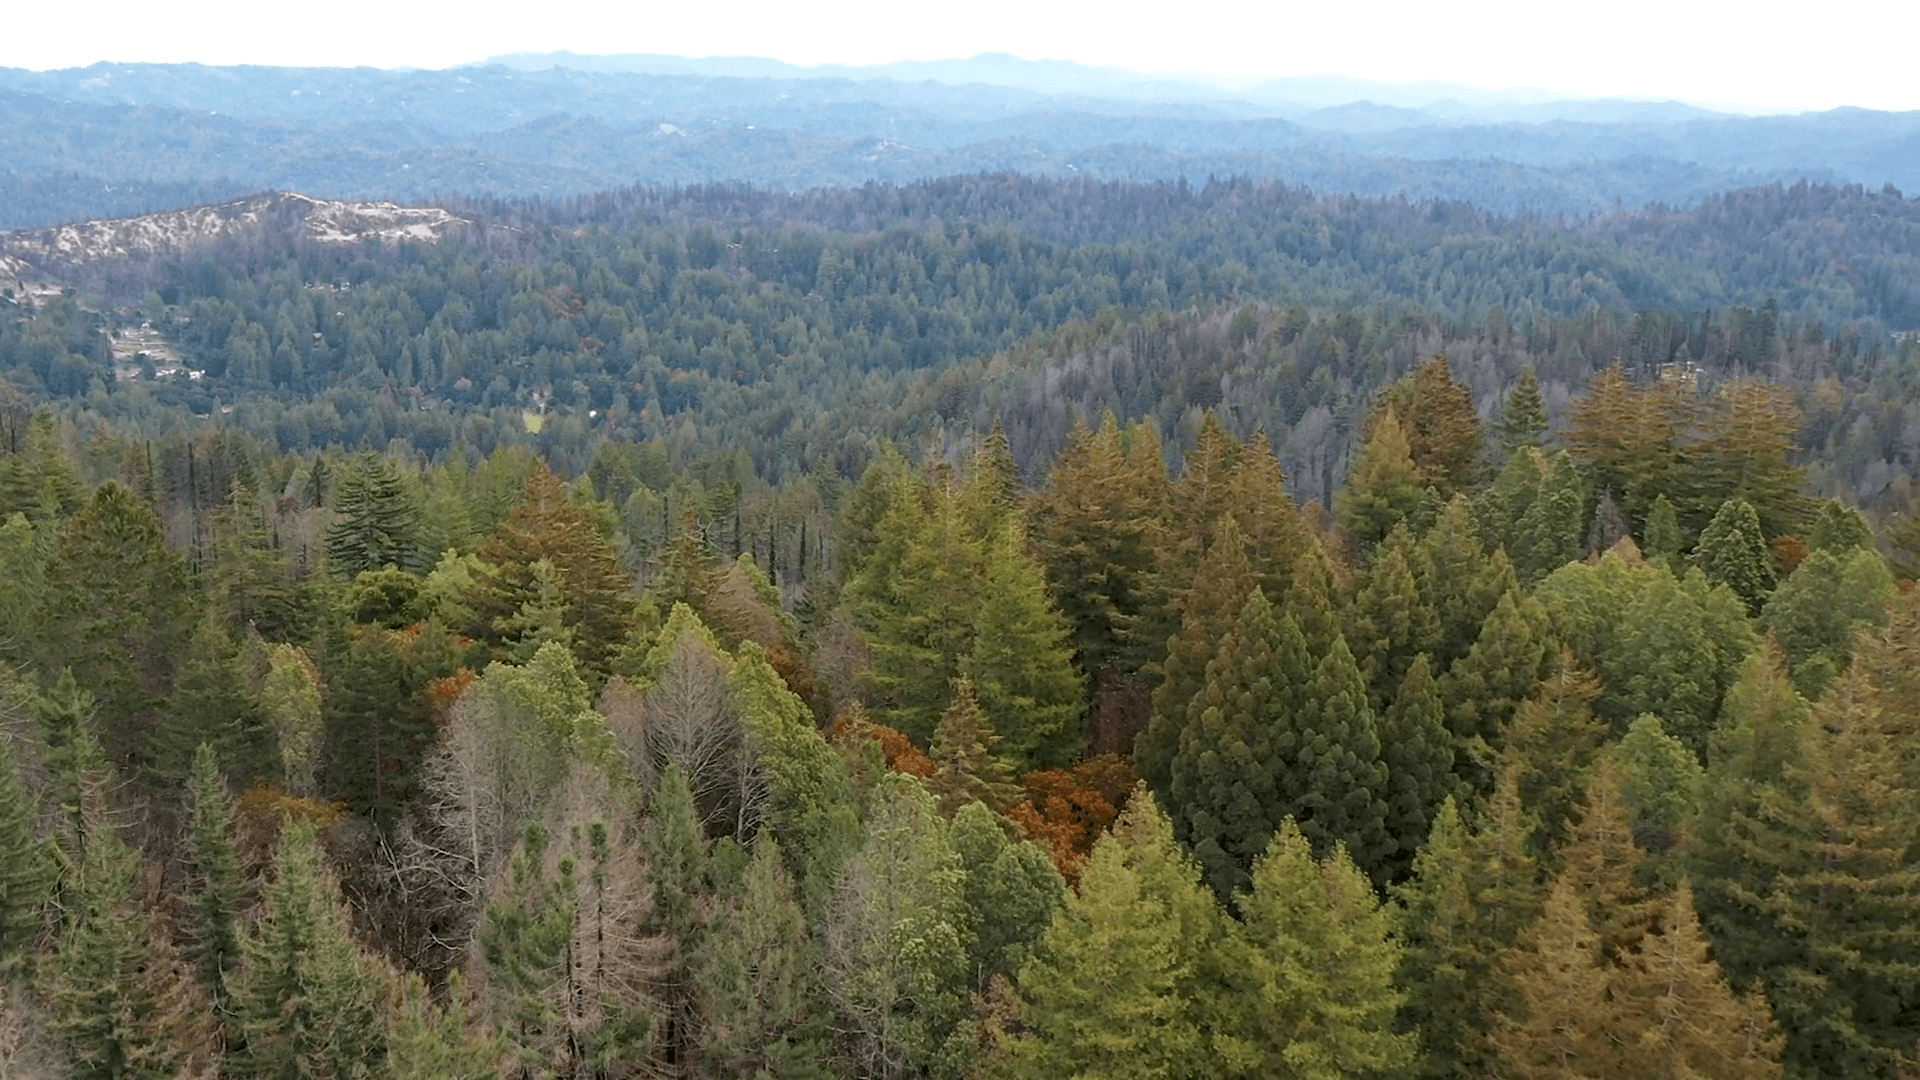 Aerial photography of the Saddle Mountain conservation area at the east entrance to Big Basin Redwoods State Park. This view looks west along California Highway 236 into Big Basin. The canopy is dominated by the crowns of redwoods, most of which were burned by the 2020 CZU wildfire. Photo by Jordan Plotsky.